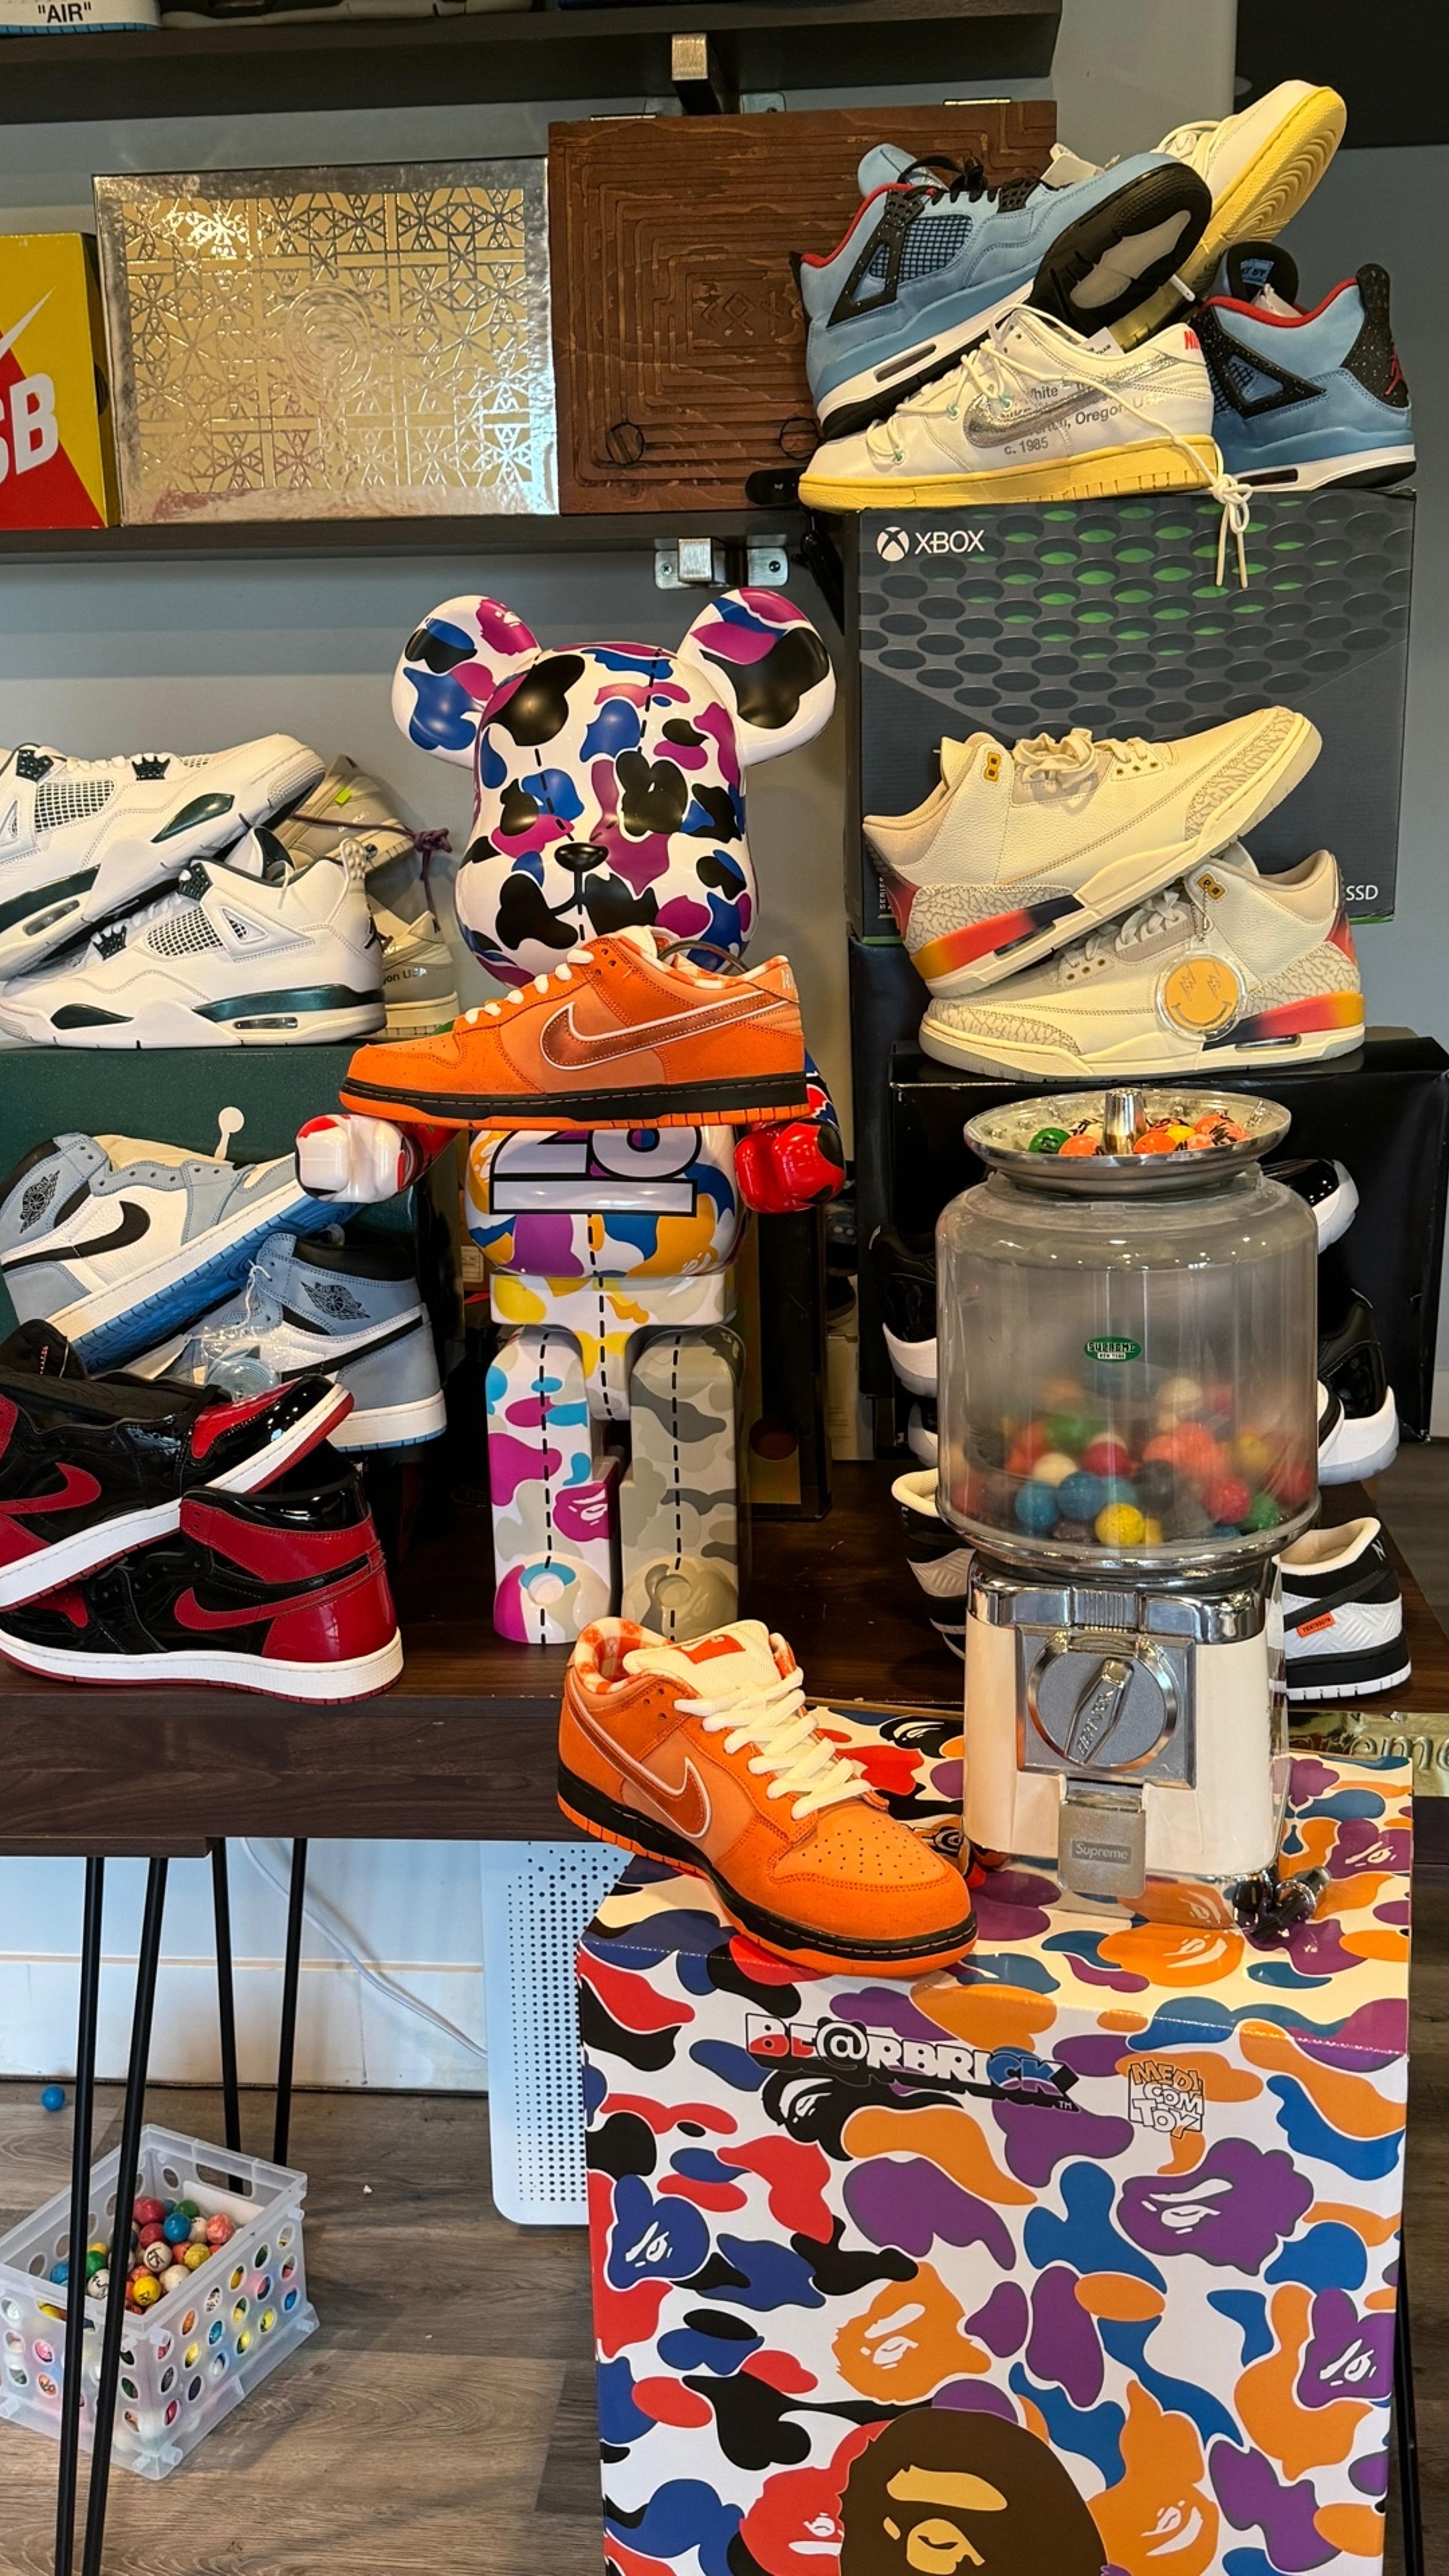 Preview image for the show titled "FUTURA SB OFFWHITE POWERPUFF PS5 R2 D2 LEGO" at Today @ 11:40 PM